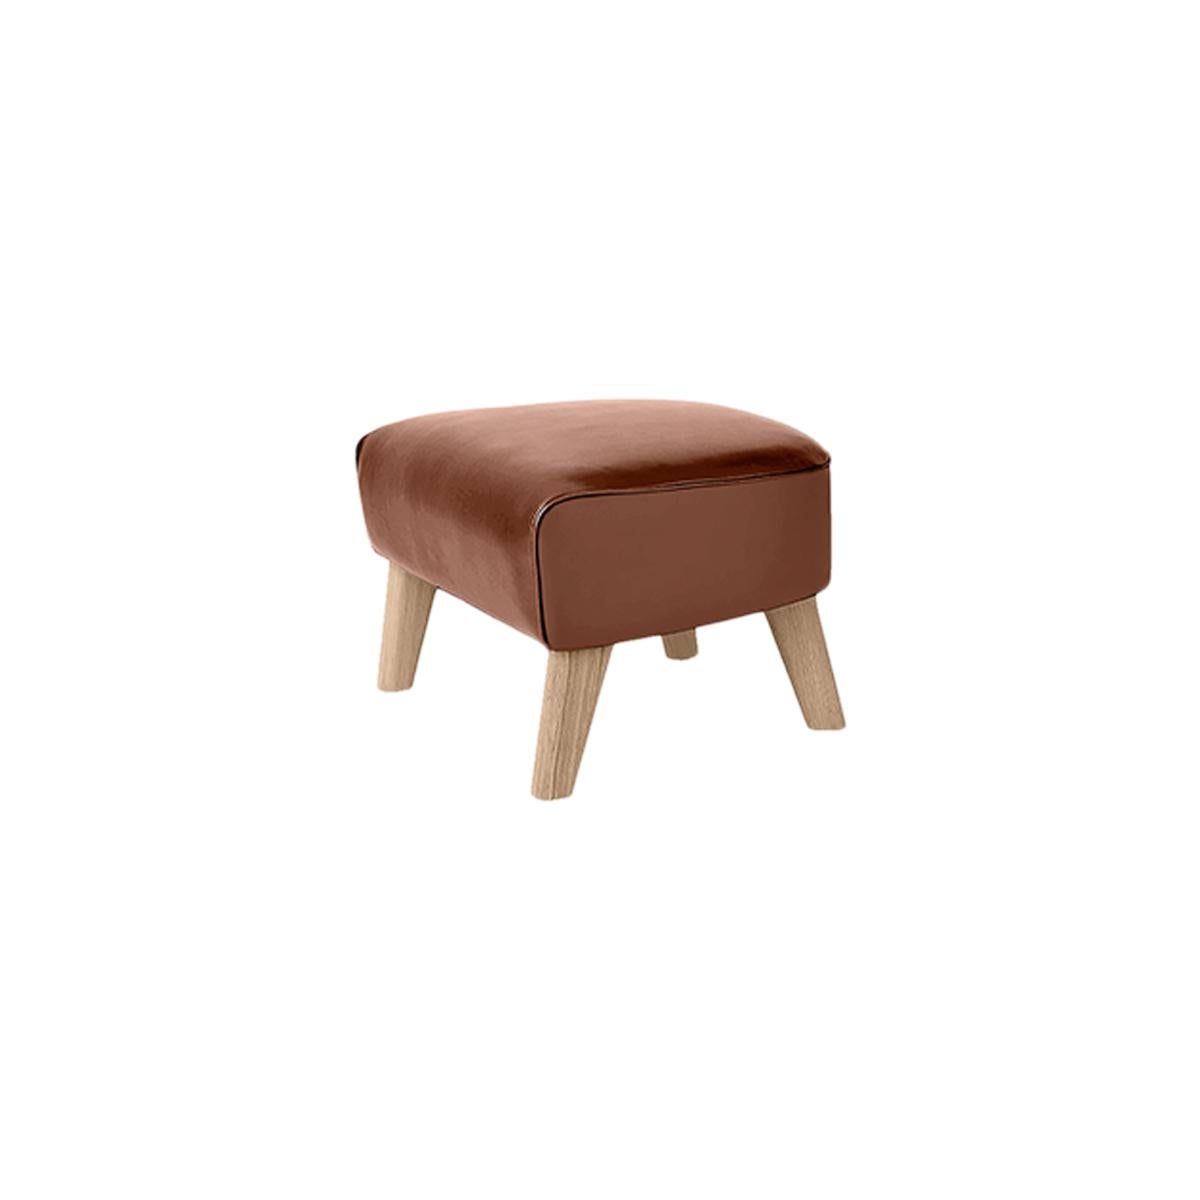 Brown leather and Nnatural Oak My Own Chair footstool by Lassen
Dimensions: w 56 x d 58 x h 40 cm 
Materials: Leather

The My Own Chair footstool has been designed in the same spirit as Flemming Lassen’s original iconic chair, reflecting his